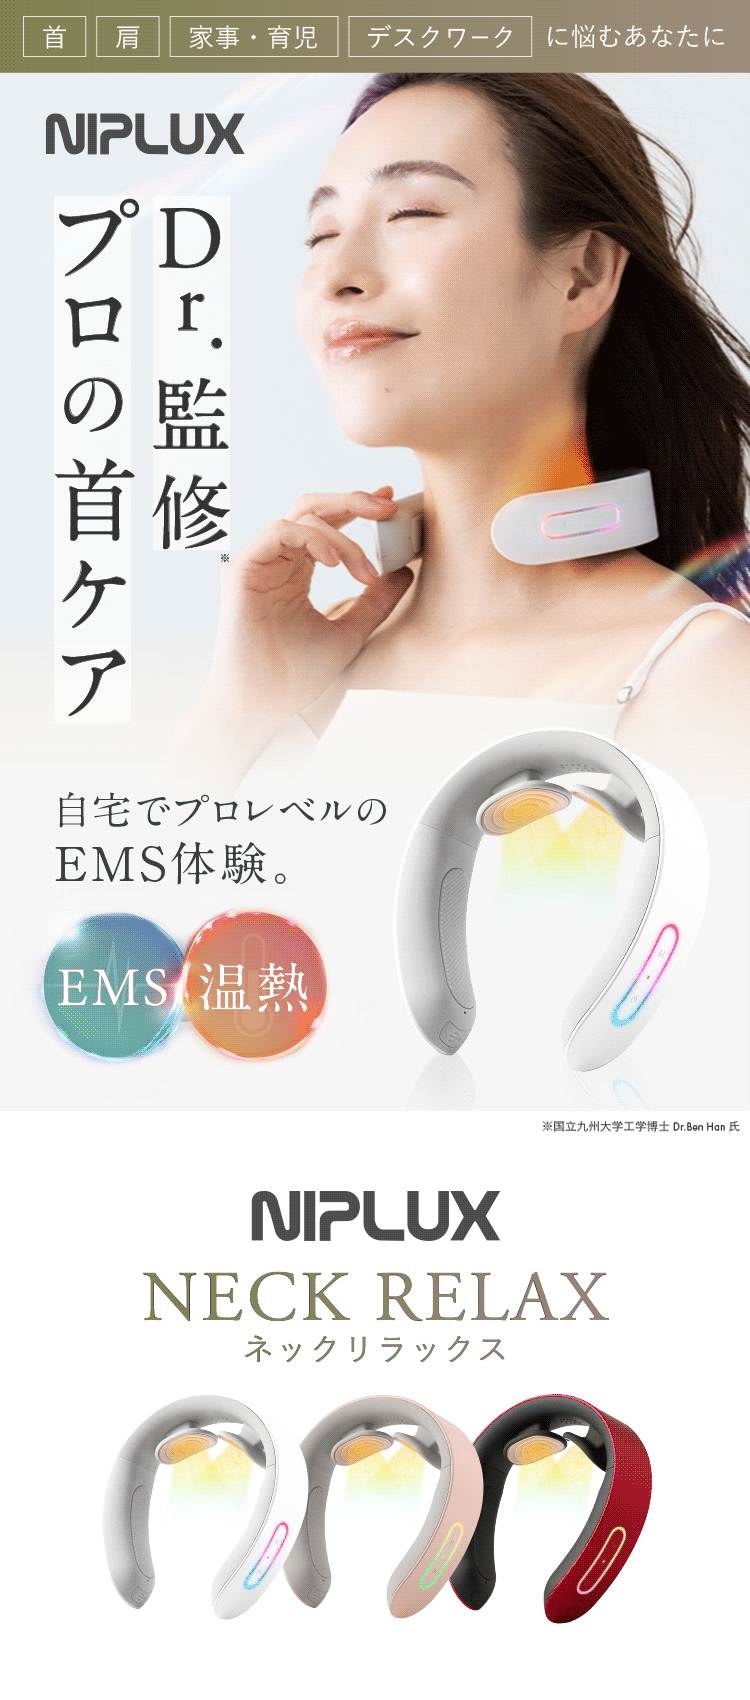 NIPLUX SHOULDER RELAX マッサージ器